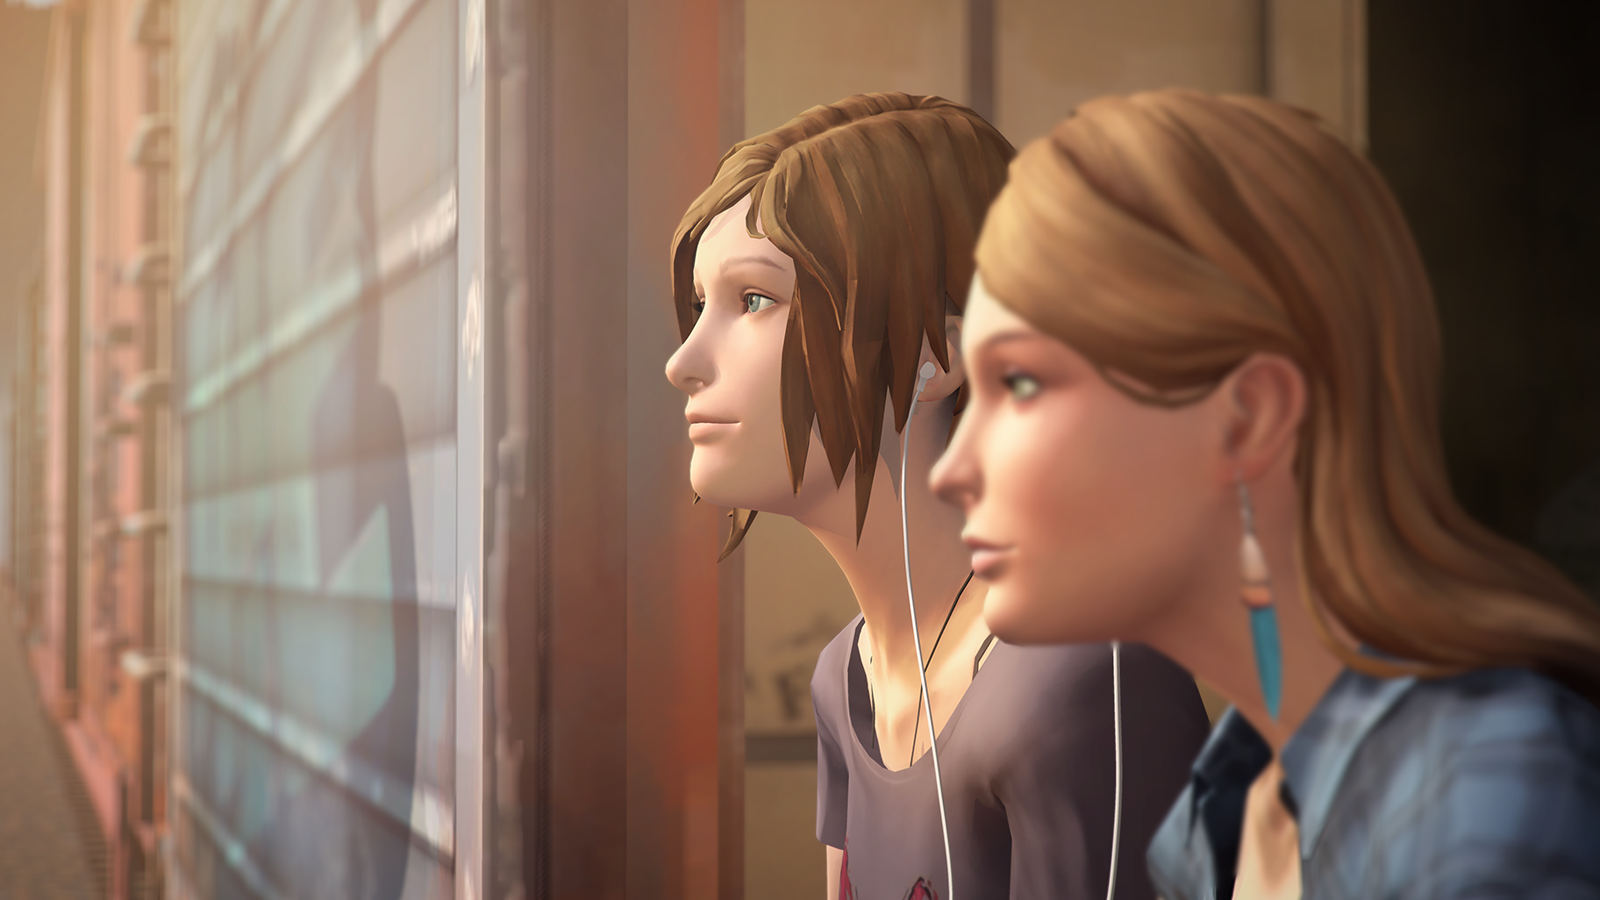 download free life is strange before the storm